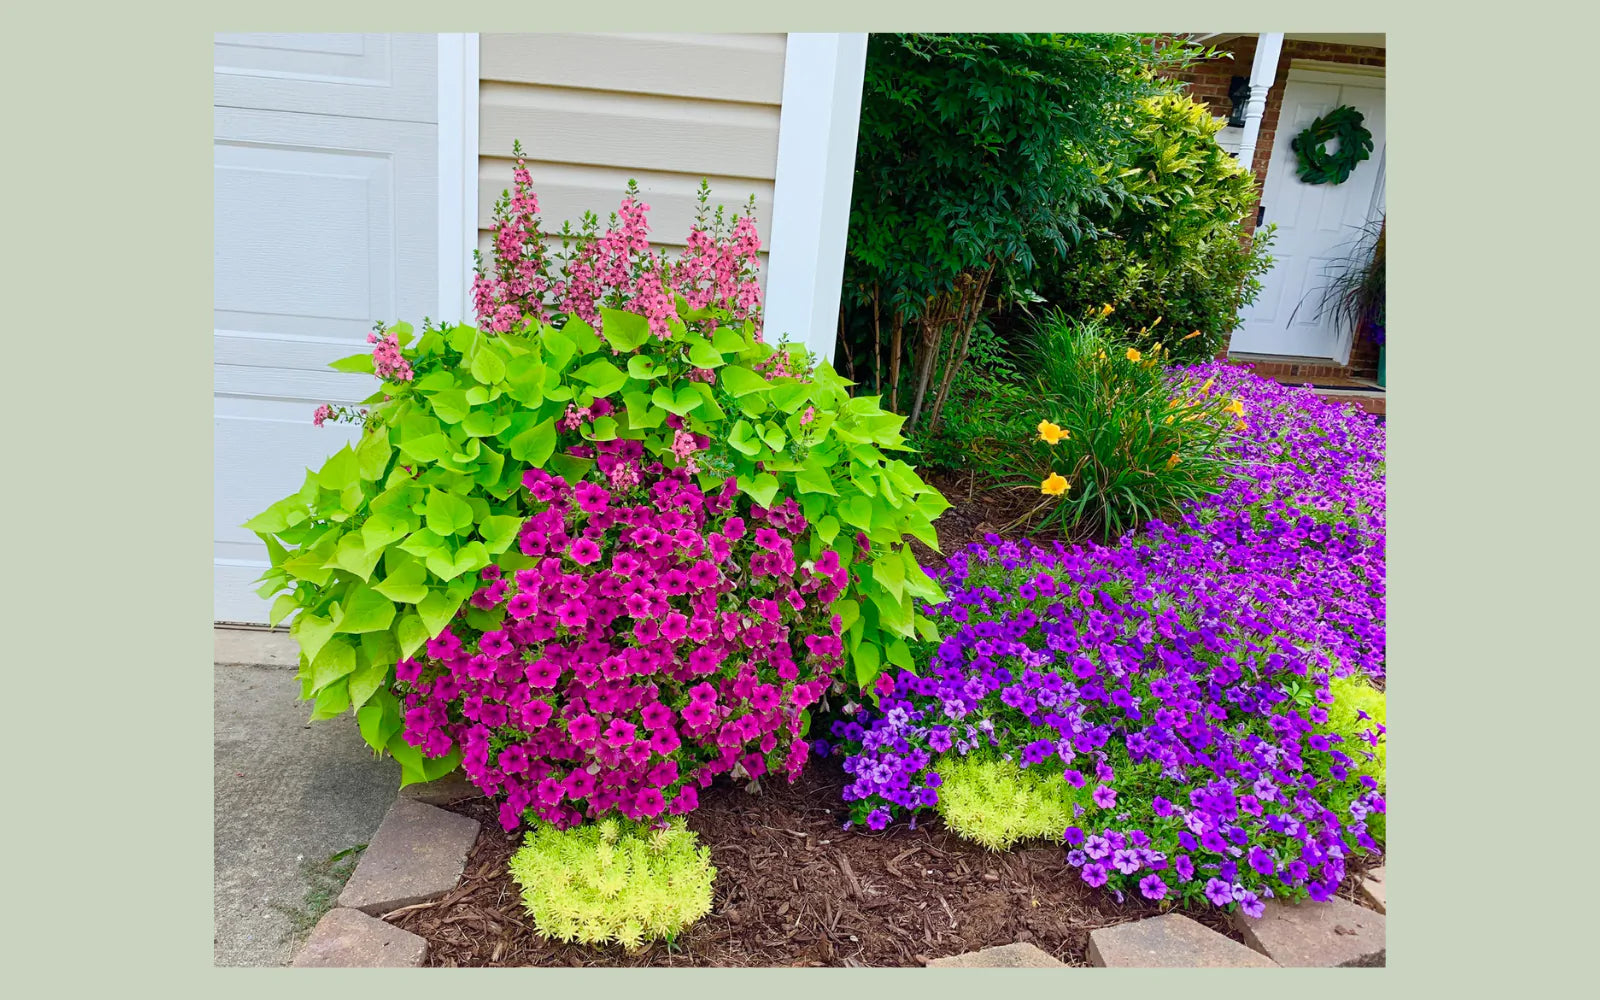 A garden vignette including chartreuse sweet potato vine, fuchsia and purple petunias, yellow sedum in a mulched flower bed.